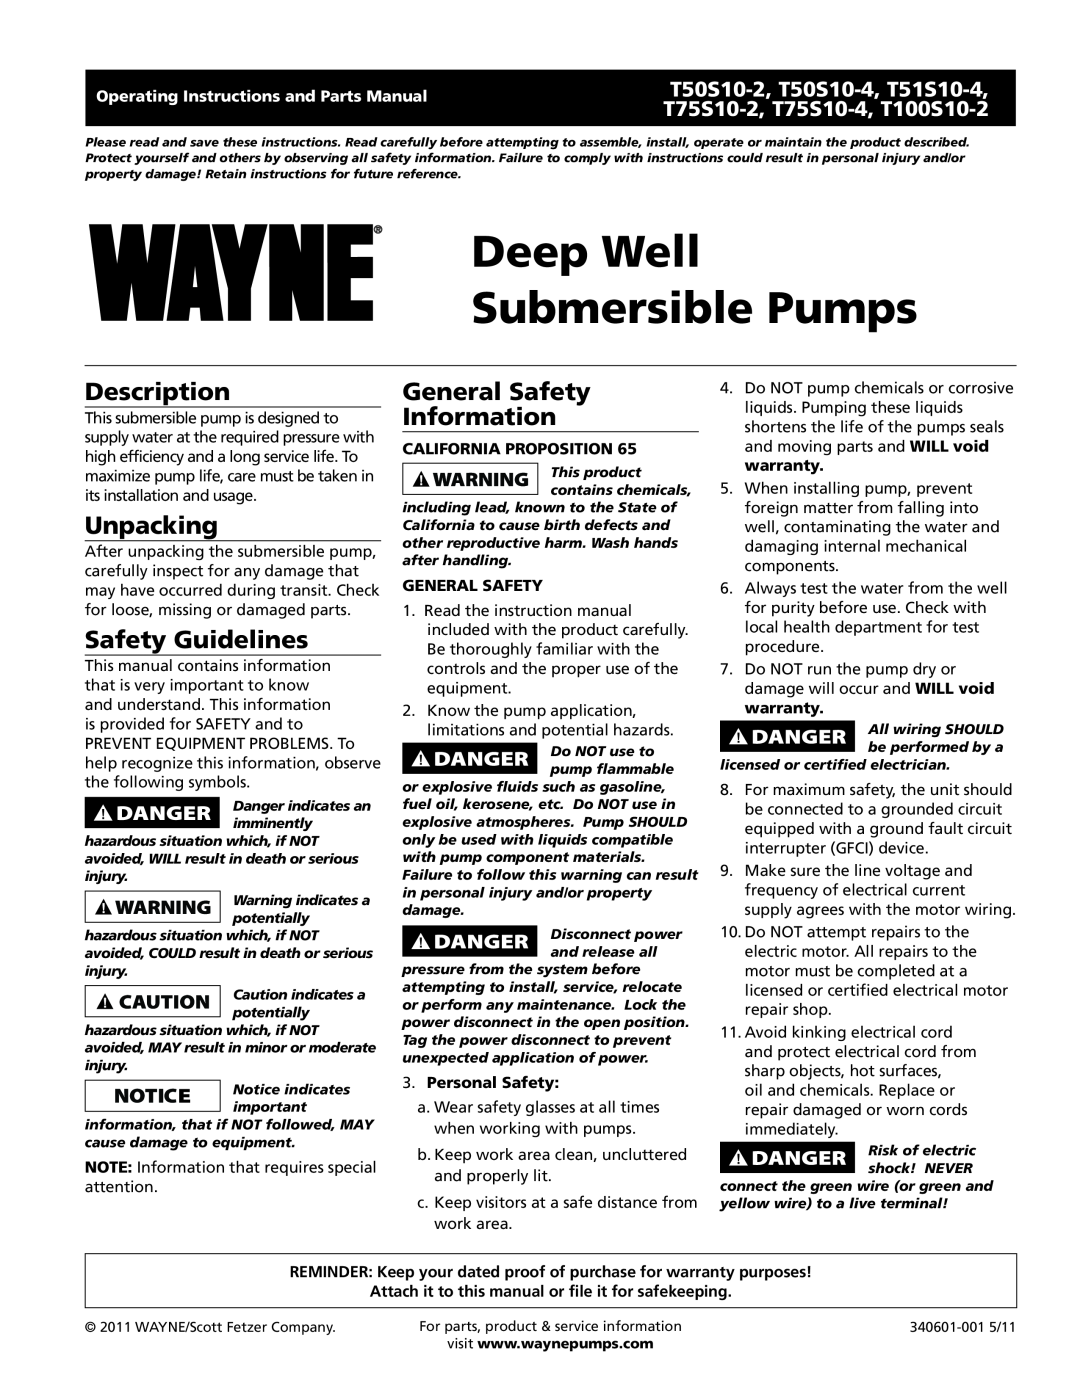 Wayne T50S10-4 warranty Deep Well Submersible Pumps, Description, Unpacking, Safety Guidelines, General Safety Information 